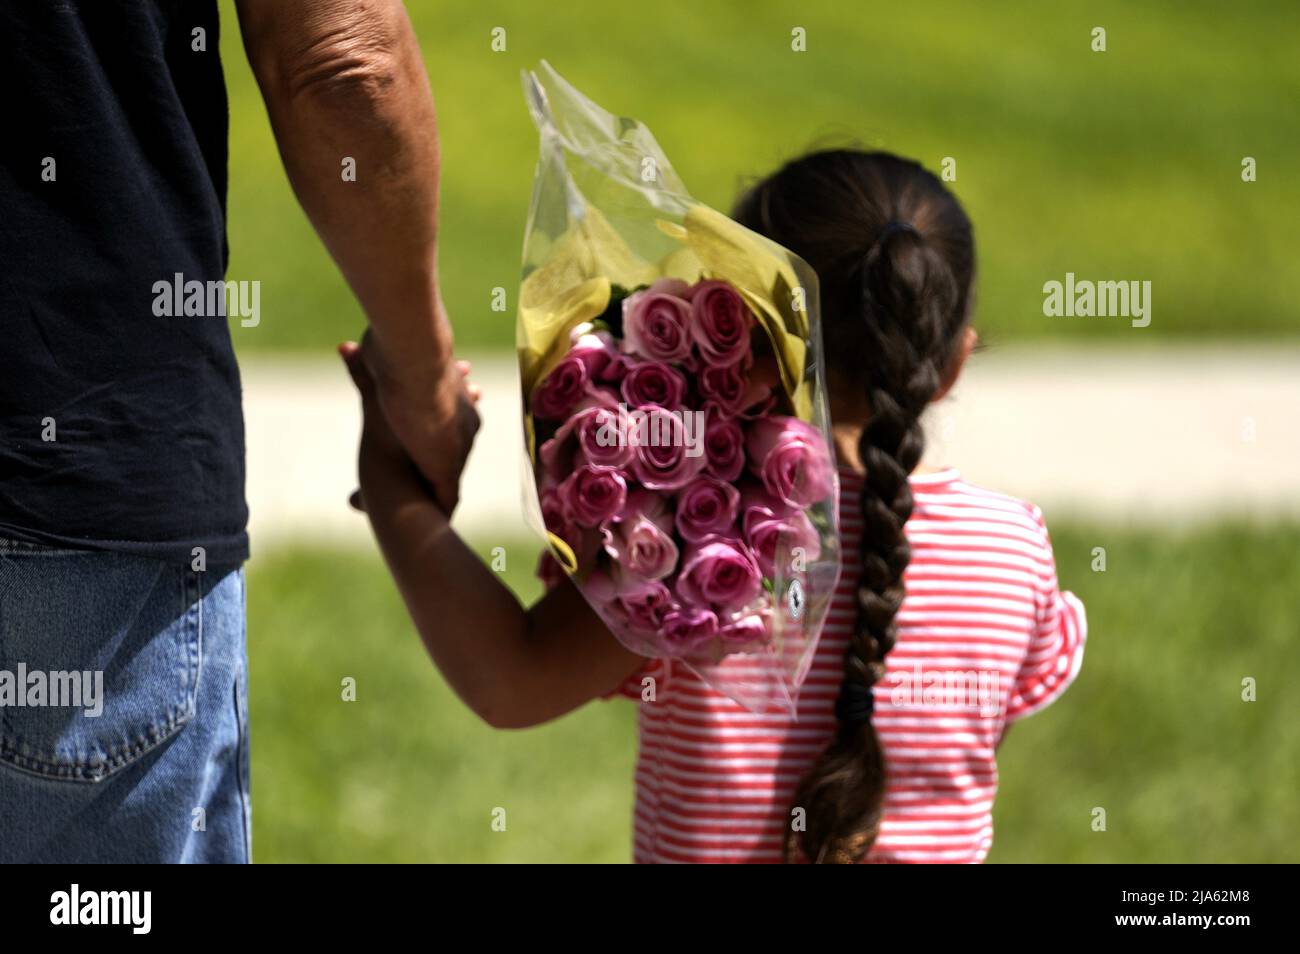 Uvalde, USA. 27th May, 2022. People mourn for victims of a school mass shooting at Town Square in Uvalde, Texas, the United States, May 27, 2022. At least 19 children and two adults were killed in a shooting at Robb Elementary School in the town of Uvalde, Texas, on Tuesday. Credit: Wu Xiaoling/Xinhua/Alamy Live News Stock Photo